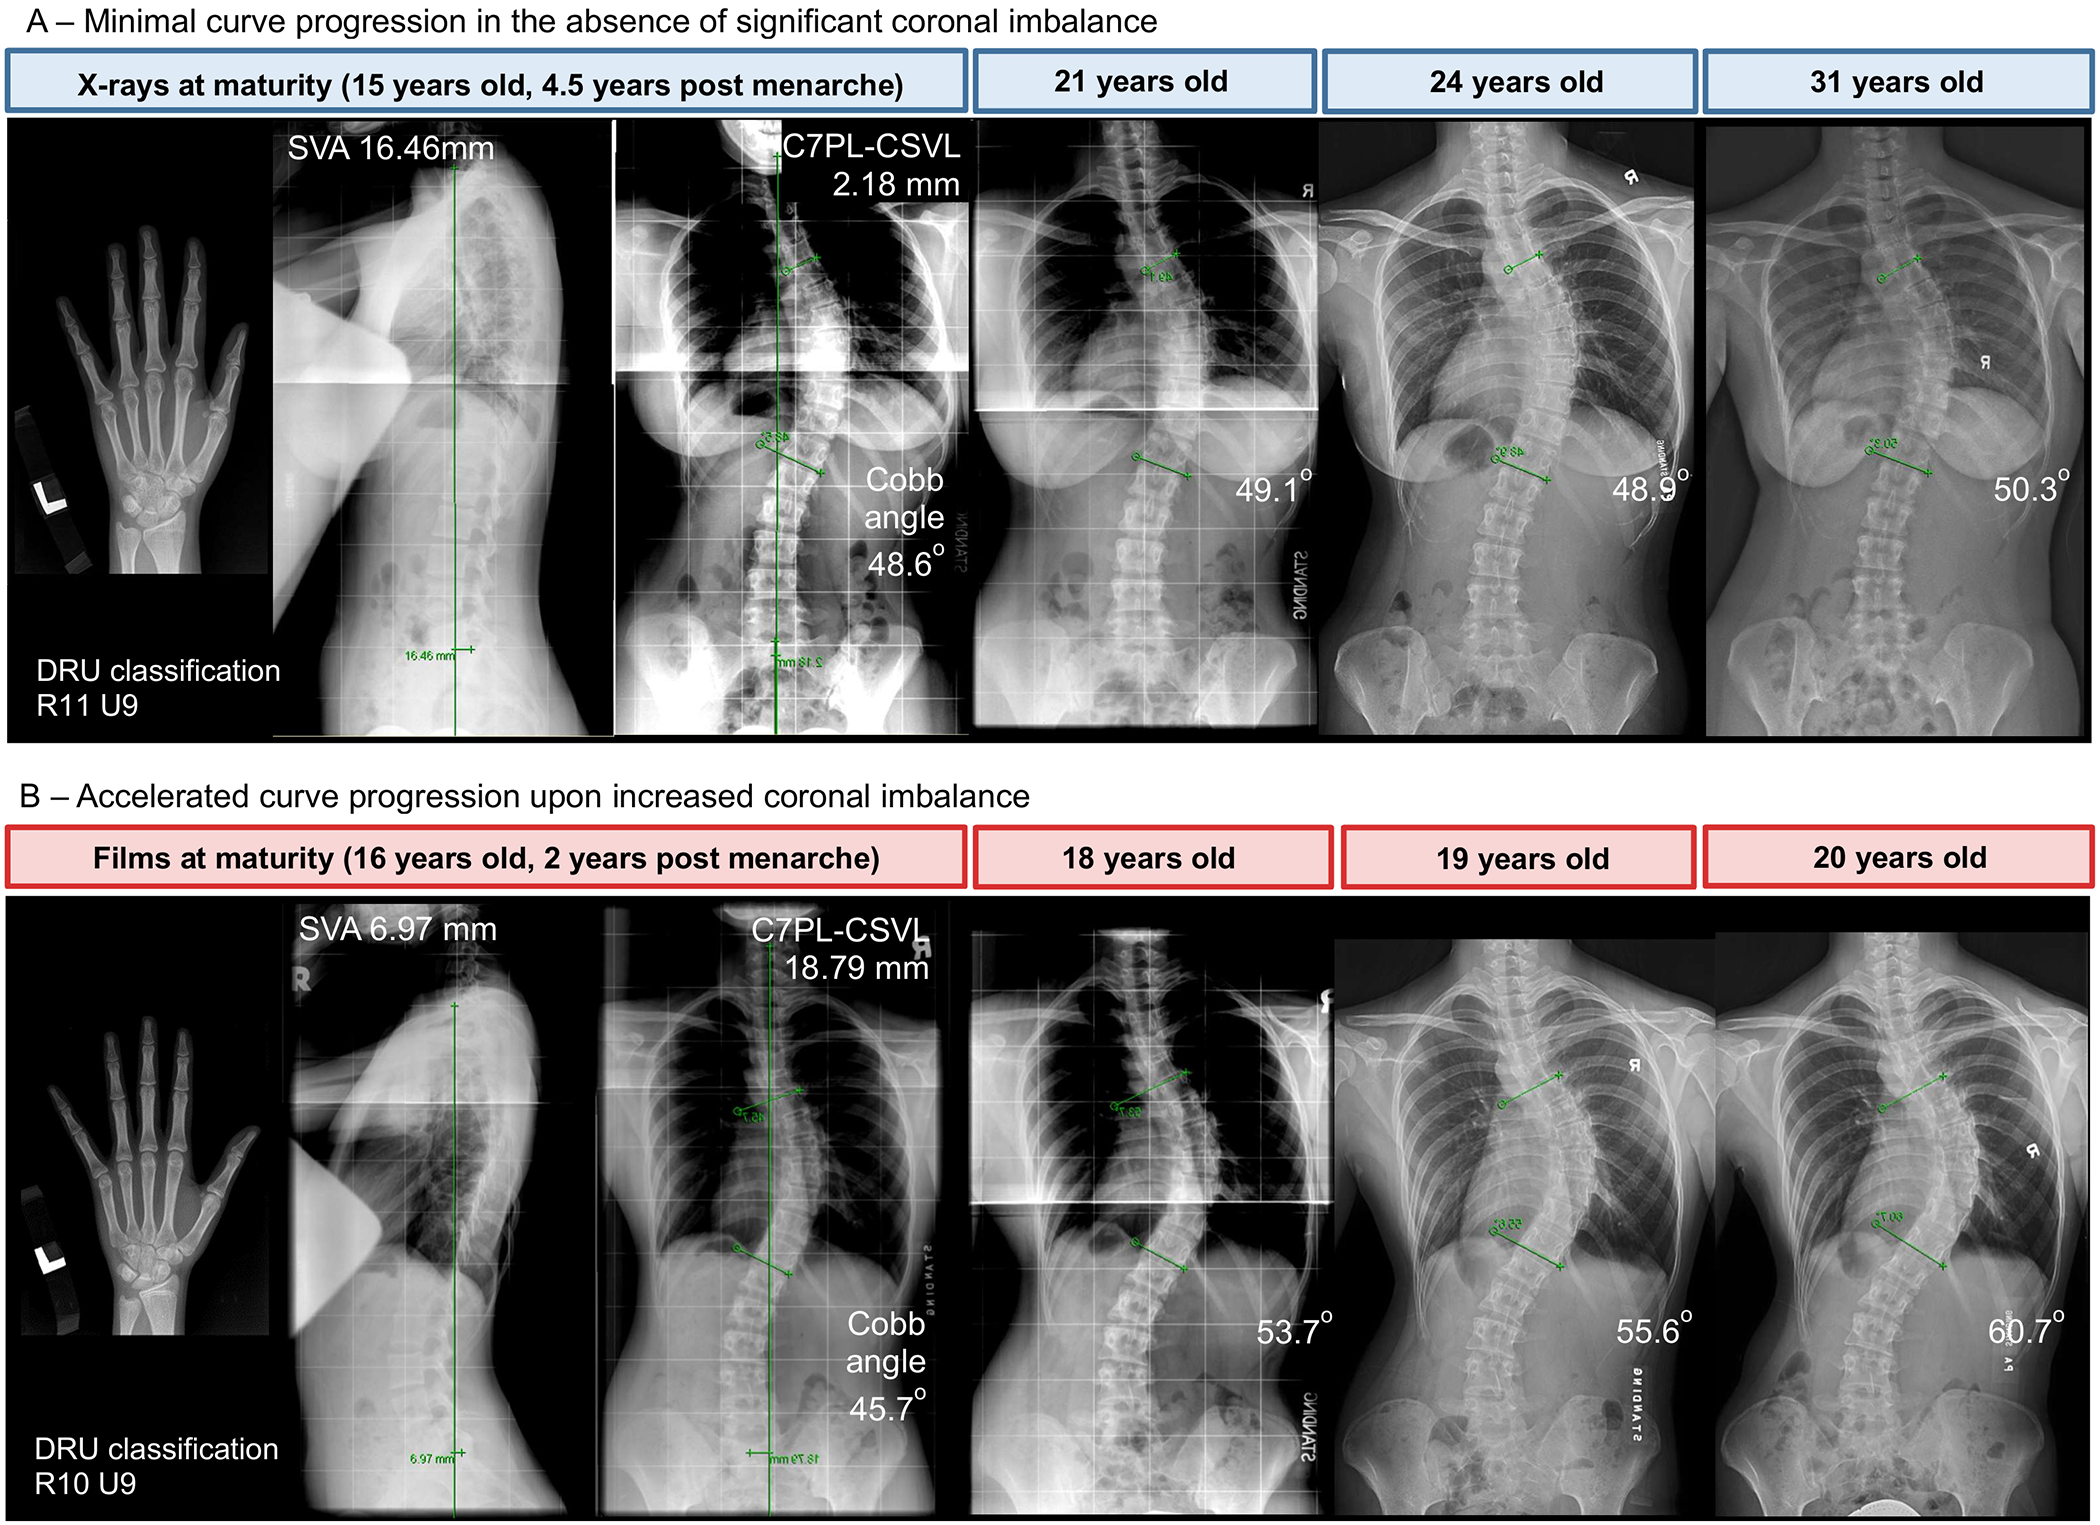 Examples of no progression and fast progression in adolescent idiopathic scoliosis curves of 40° to 50°.